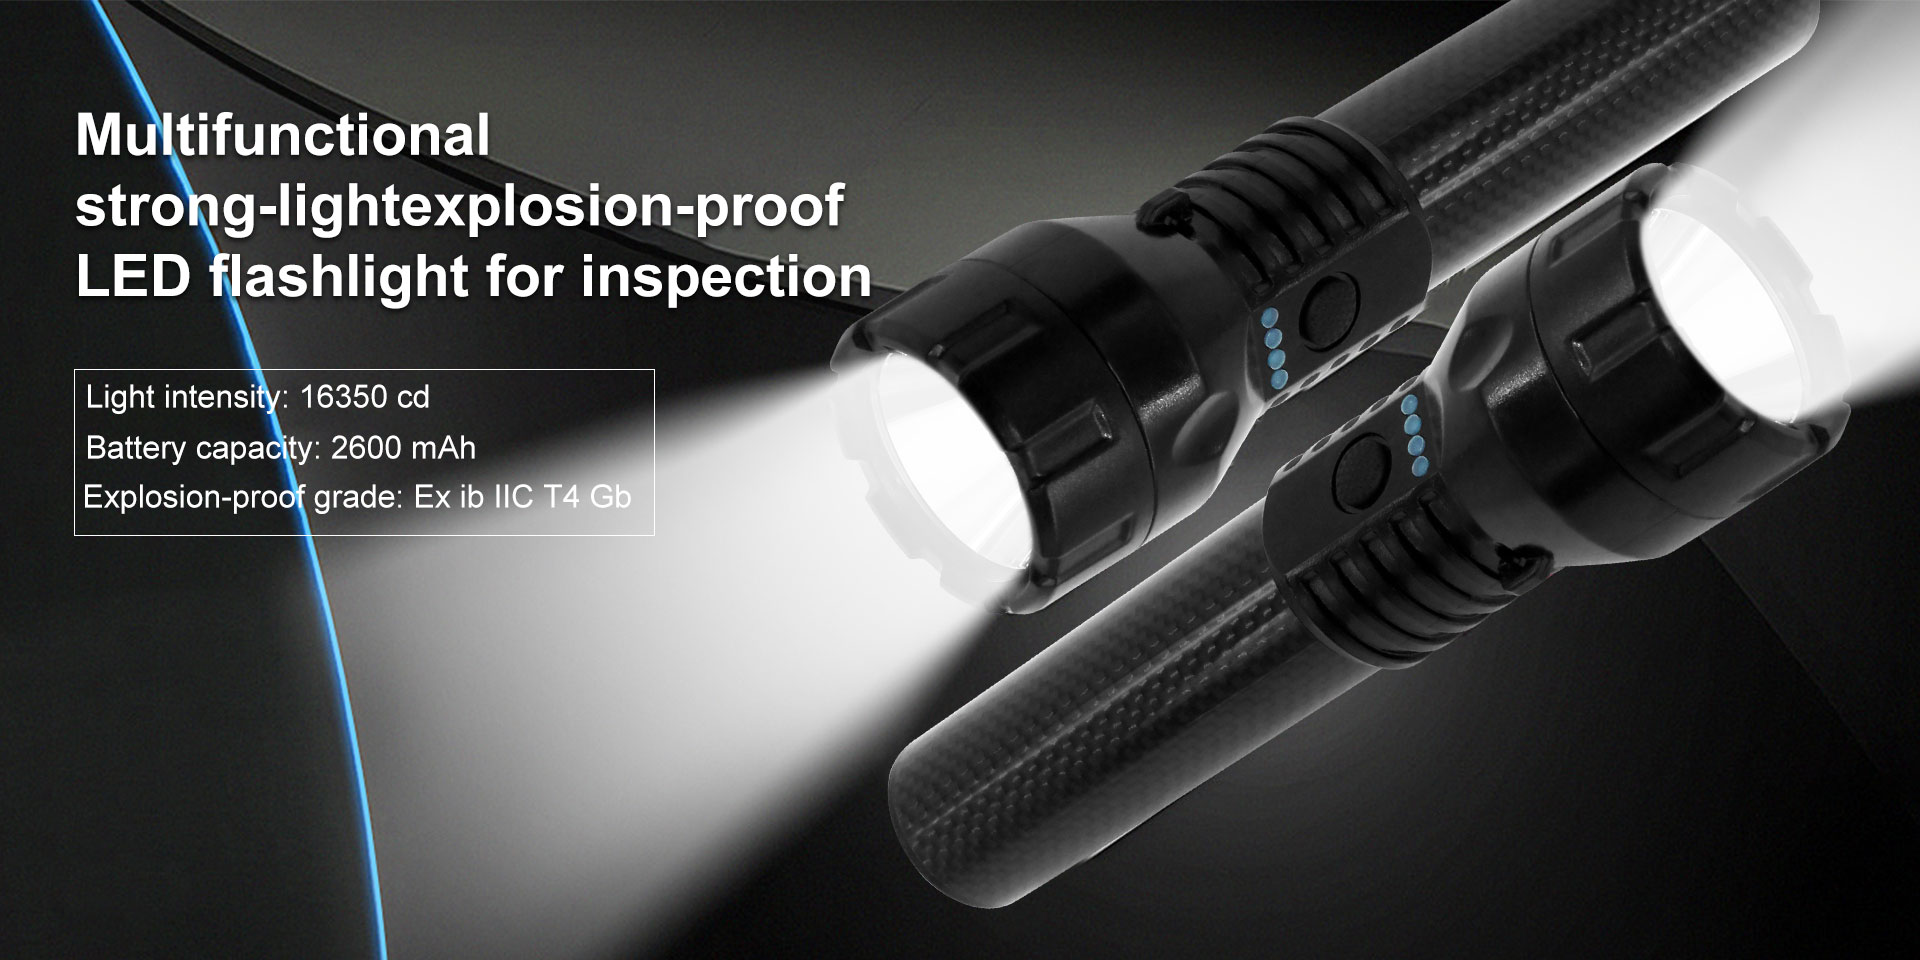 explosion proof led hand lamp